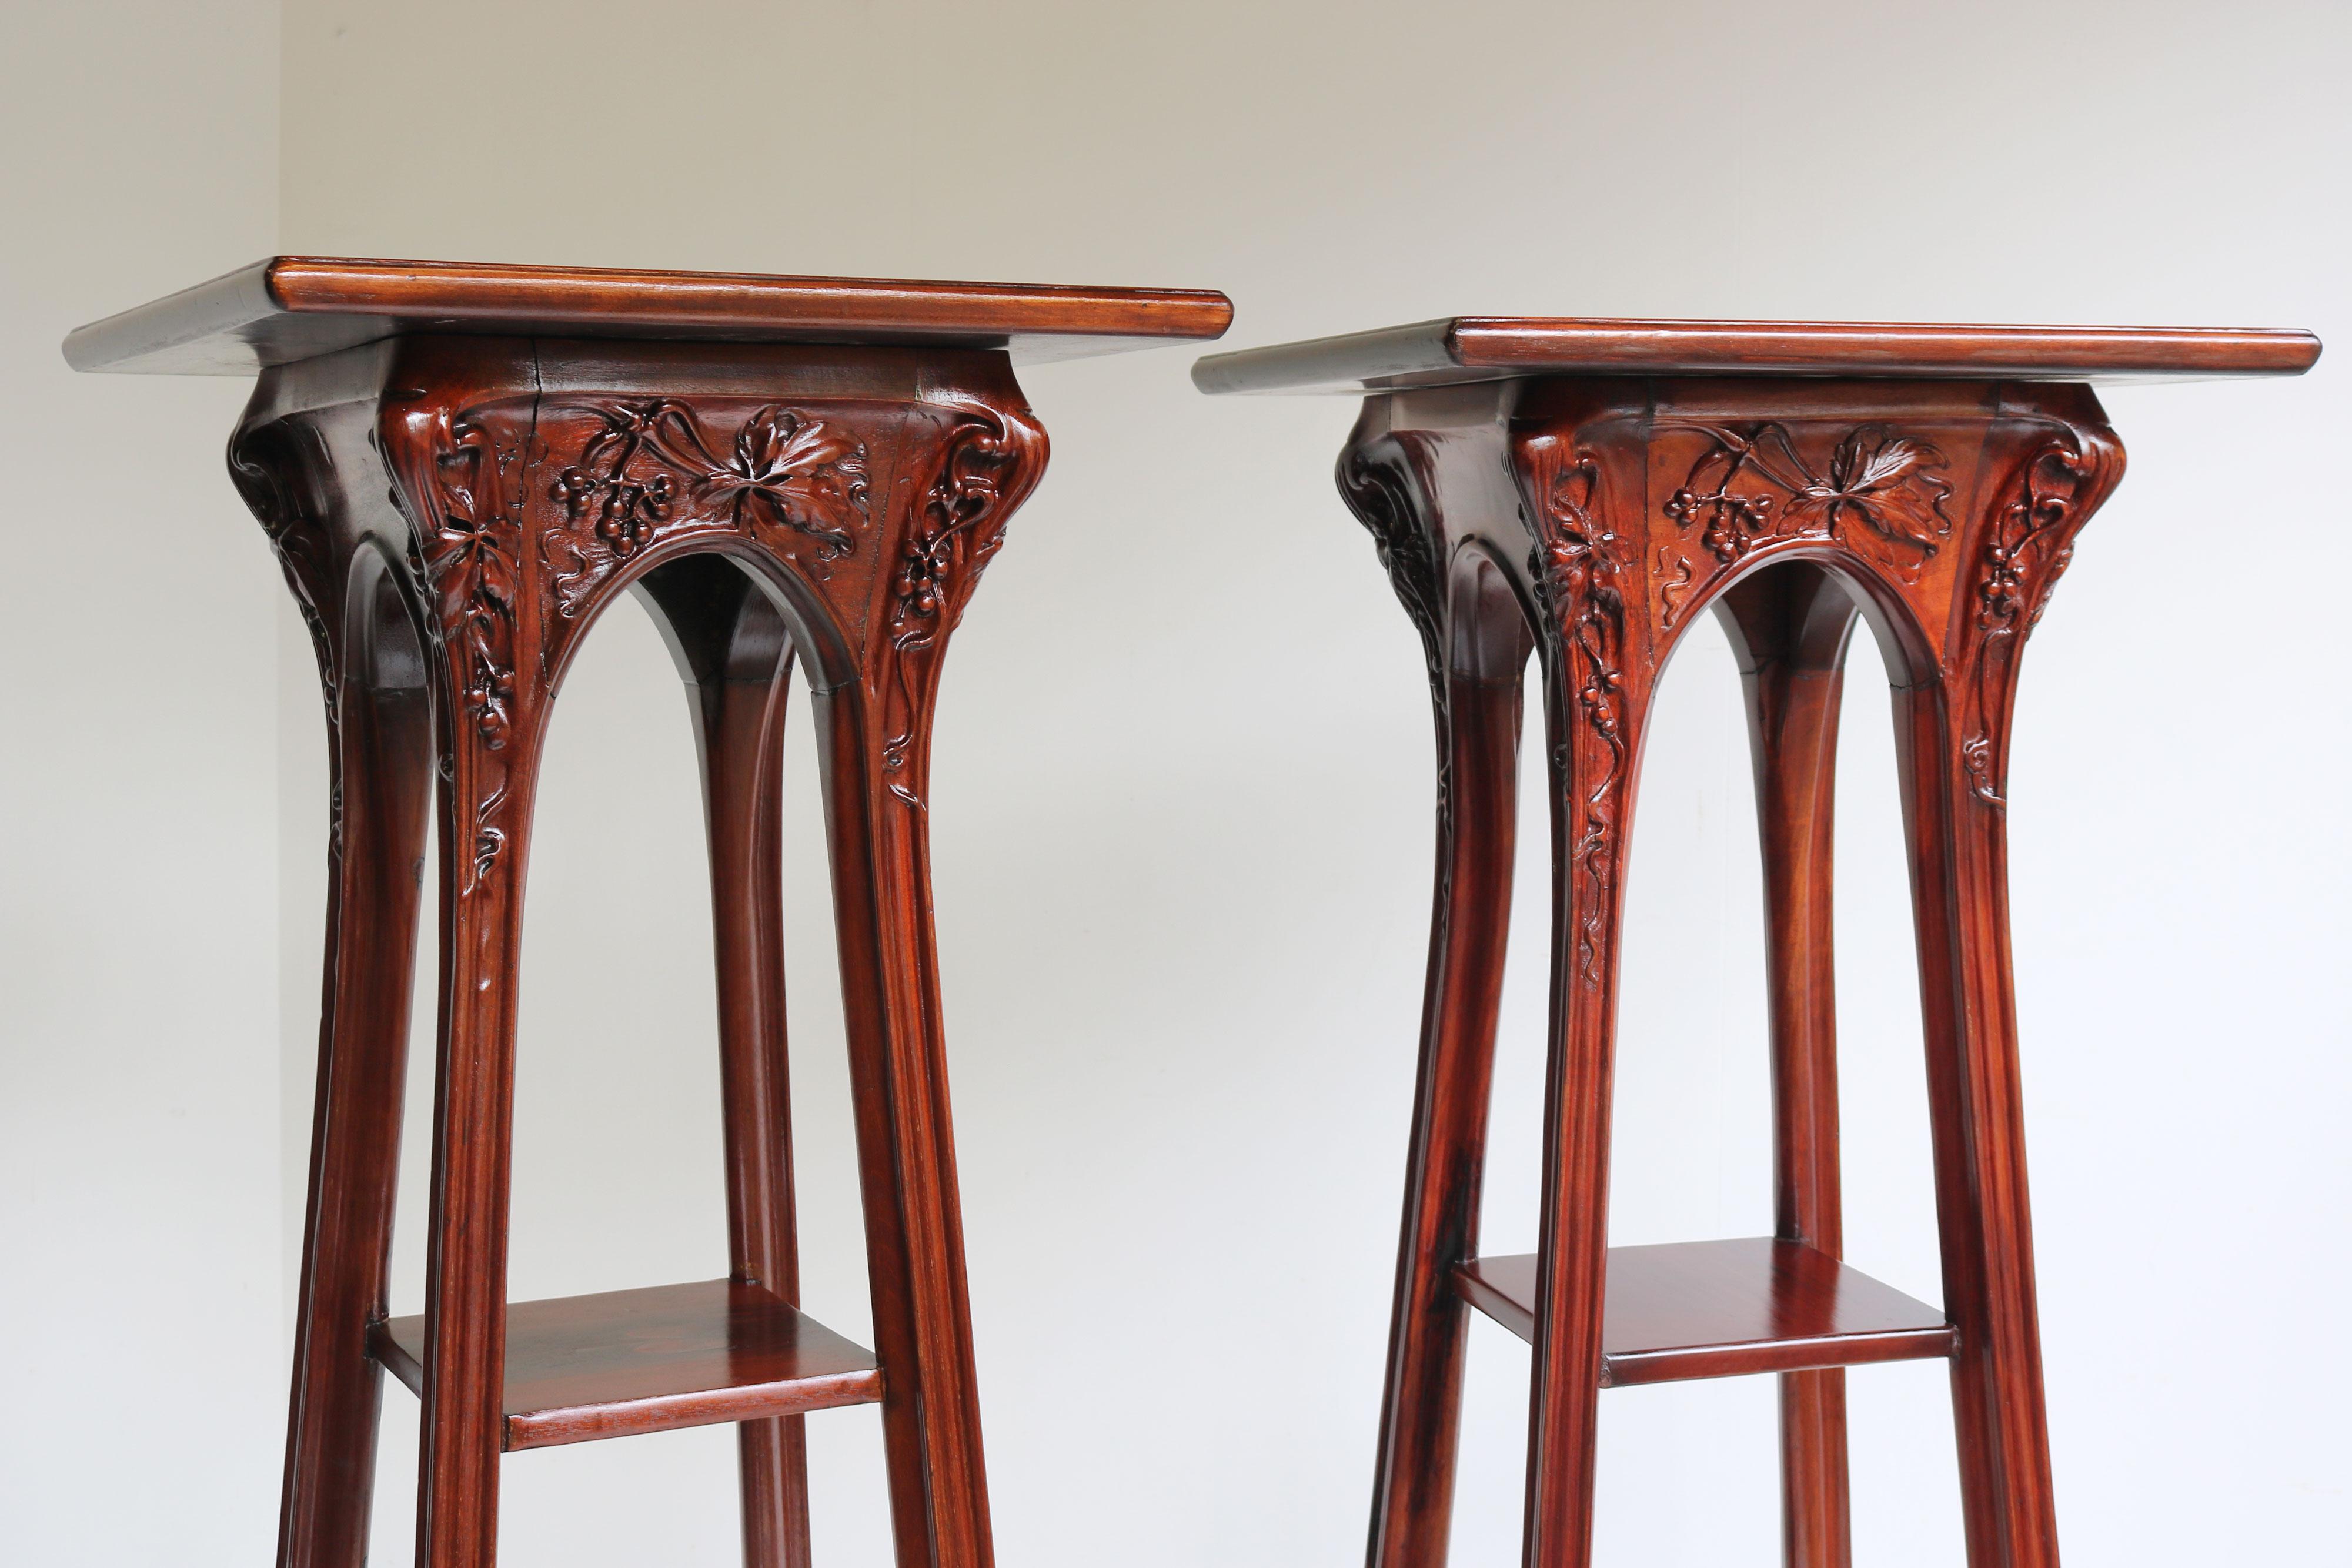 Hand-Carved Pair of French Art Nouveau Plant stands / pedestals by Louis Majorelle 1907  #1 For Sale